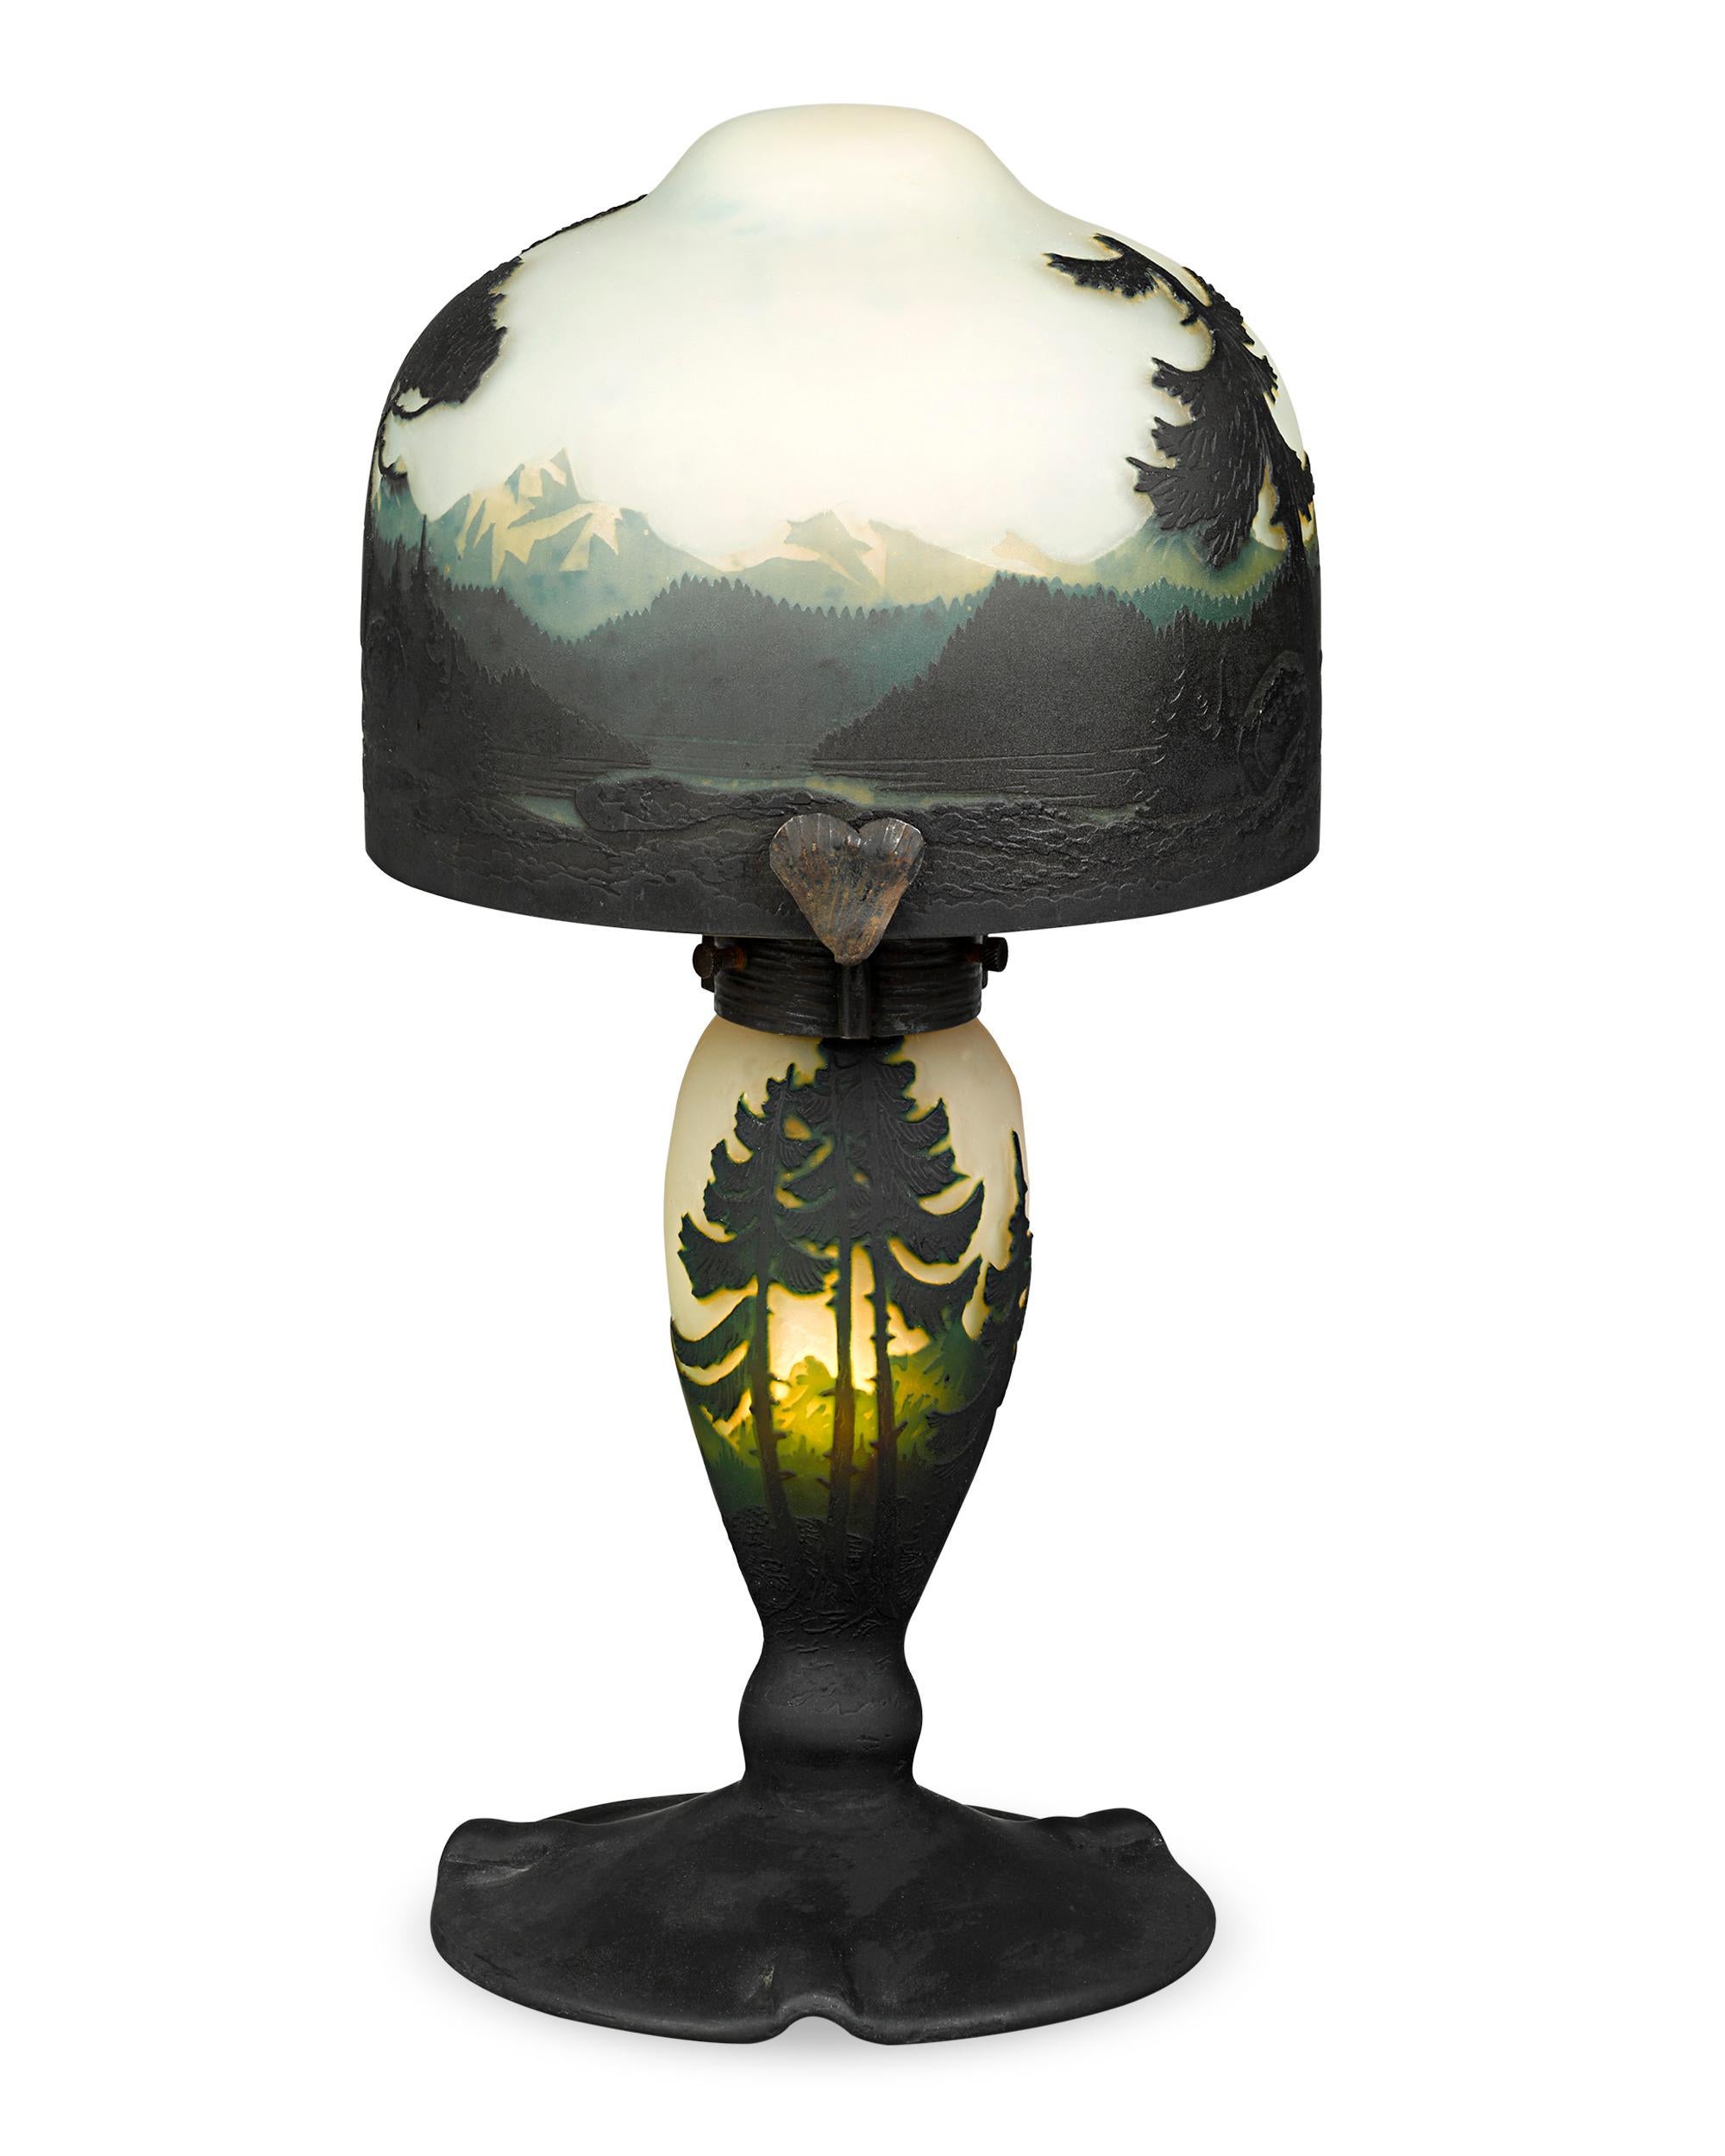 This beautiful cameo art glass lamp is from the acclaimed Muller Frères glassworks and depicts the wilderness surrounding their Lunéville, France studios. Exceptional in its artistry, the lamp casts an alluring glow reminiscent of a hazy morning.